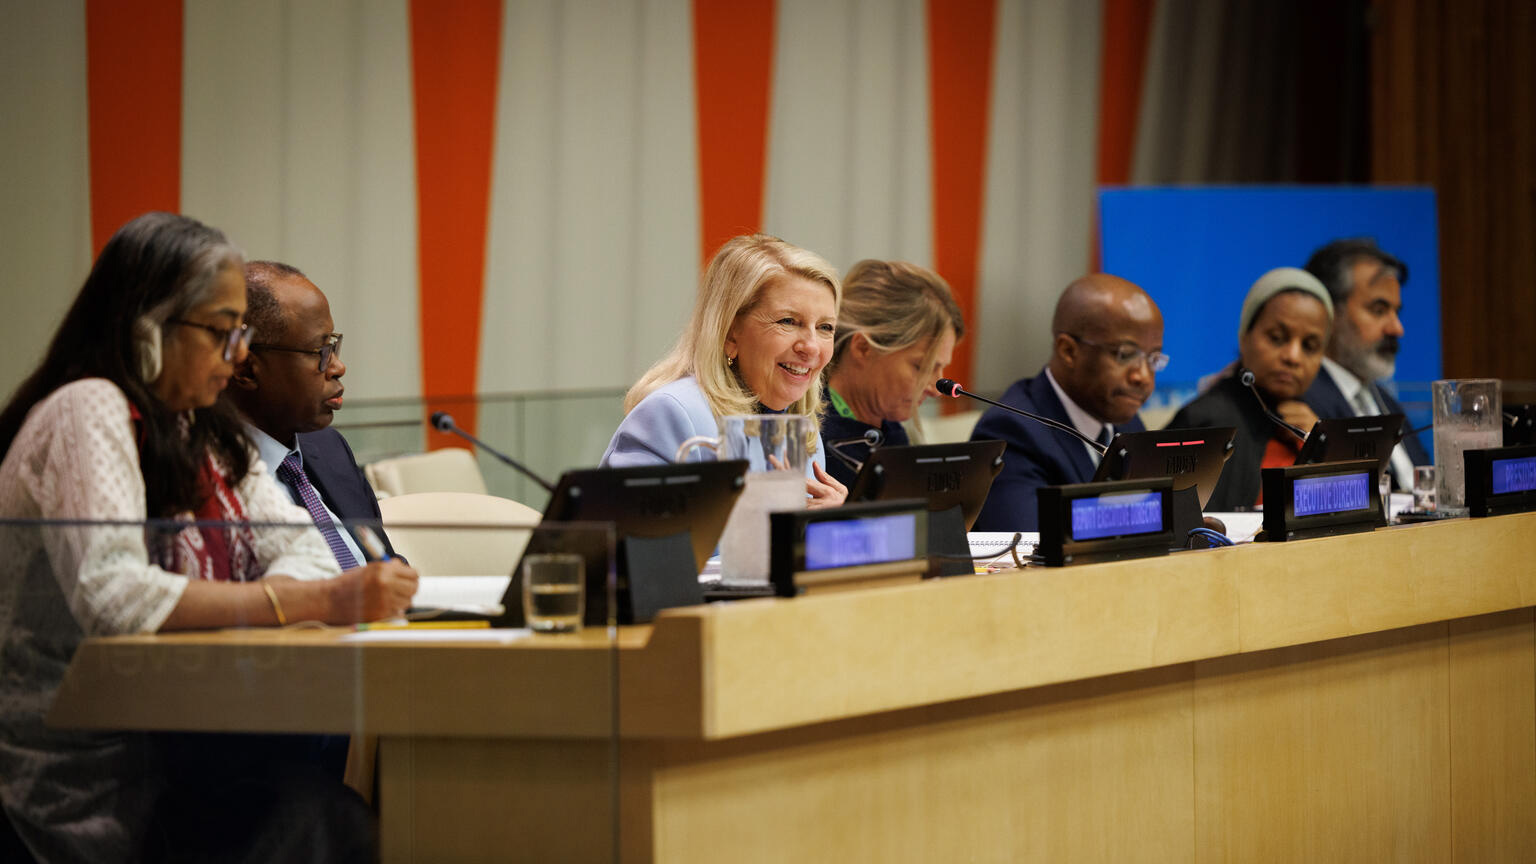 Ms. Catherine Russell (third from left at dais), Executive Director of UNICEF, makes remarks in response to delegate statements during the first plenary meeting of the UNICEF Executive Board Annual Session 2023, convened on 13 June 2023 in the Economic and Social Council (ECOSOC) Chamber at United Nations Headquarters in New York.